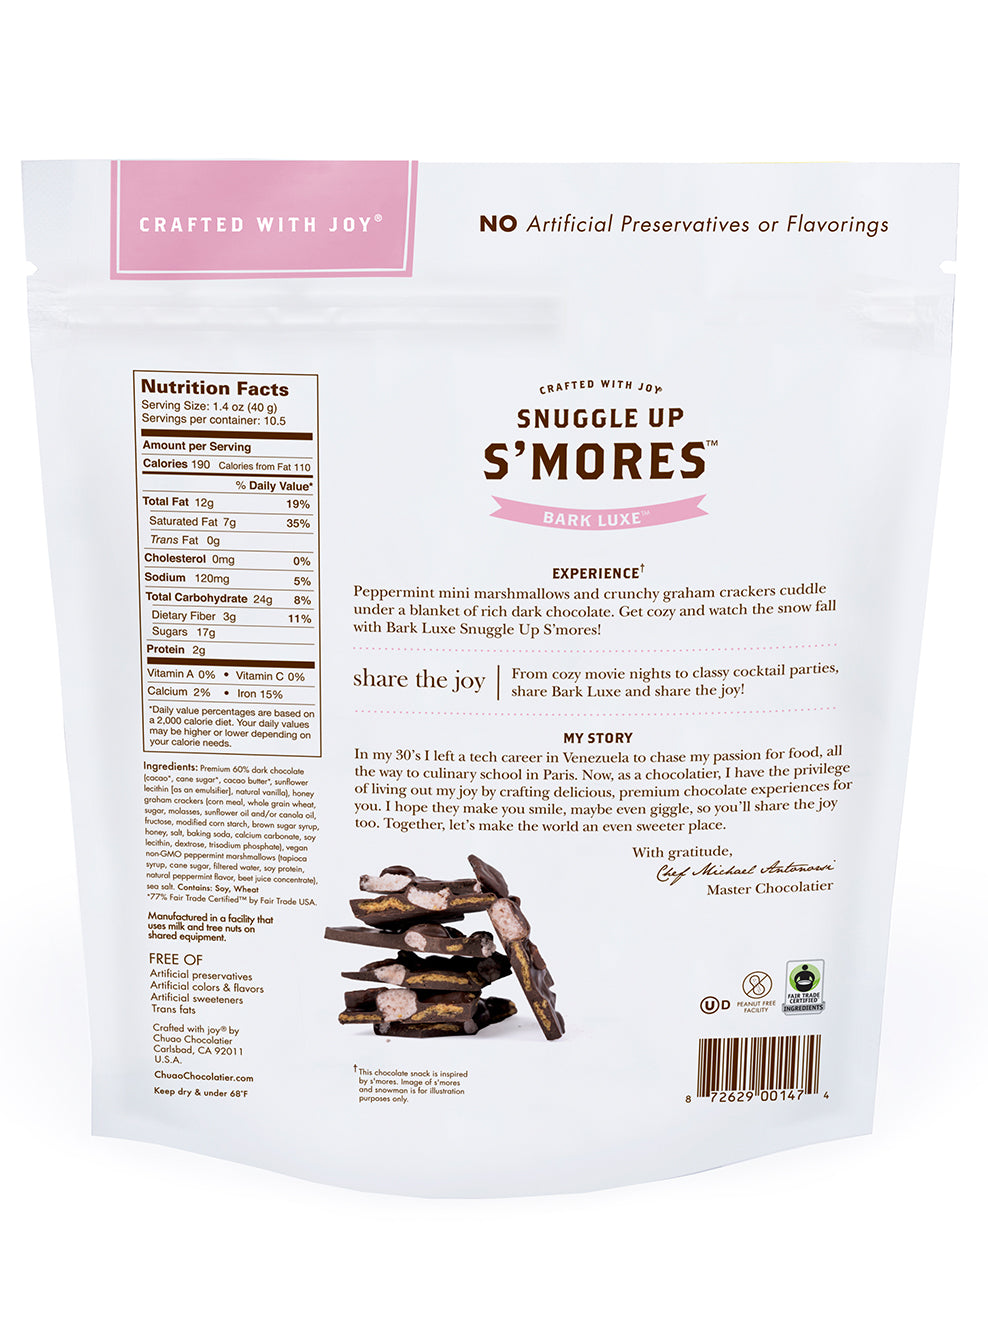 Bark Luxe Snuggle Up S'mores 